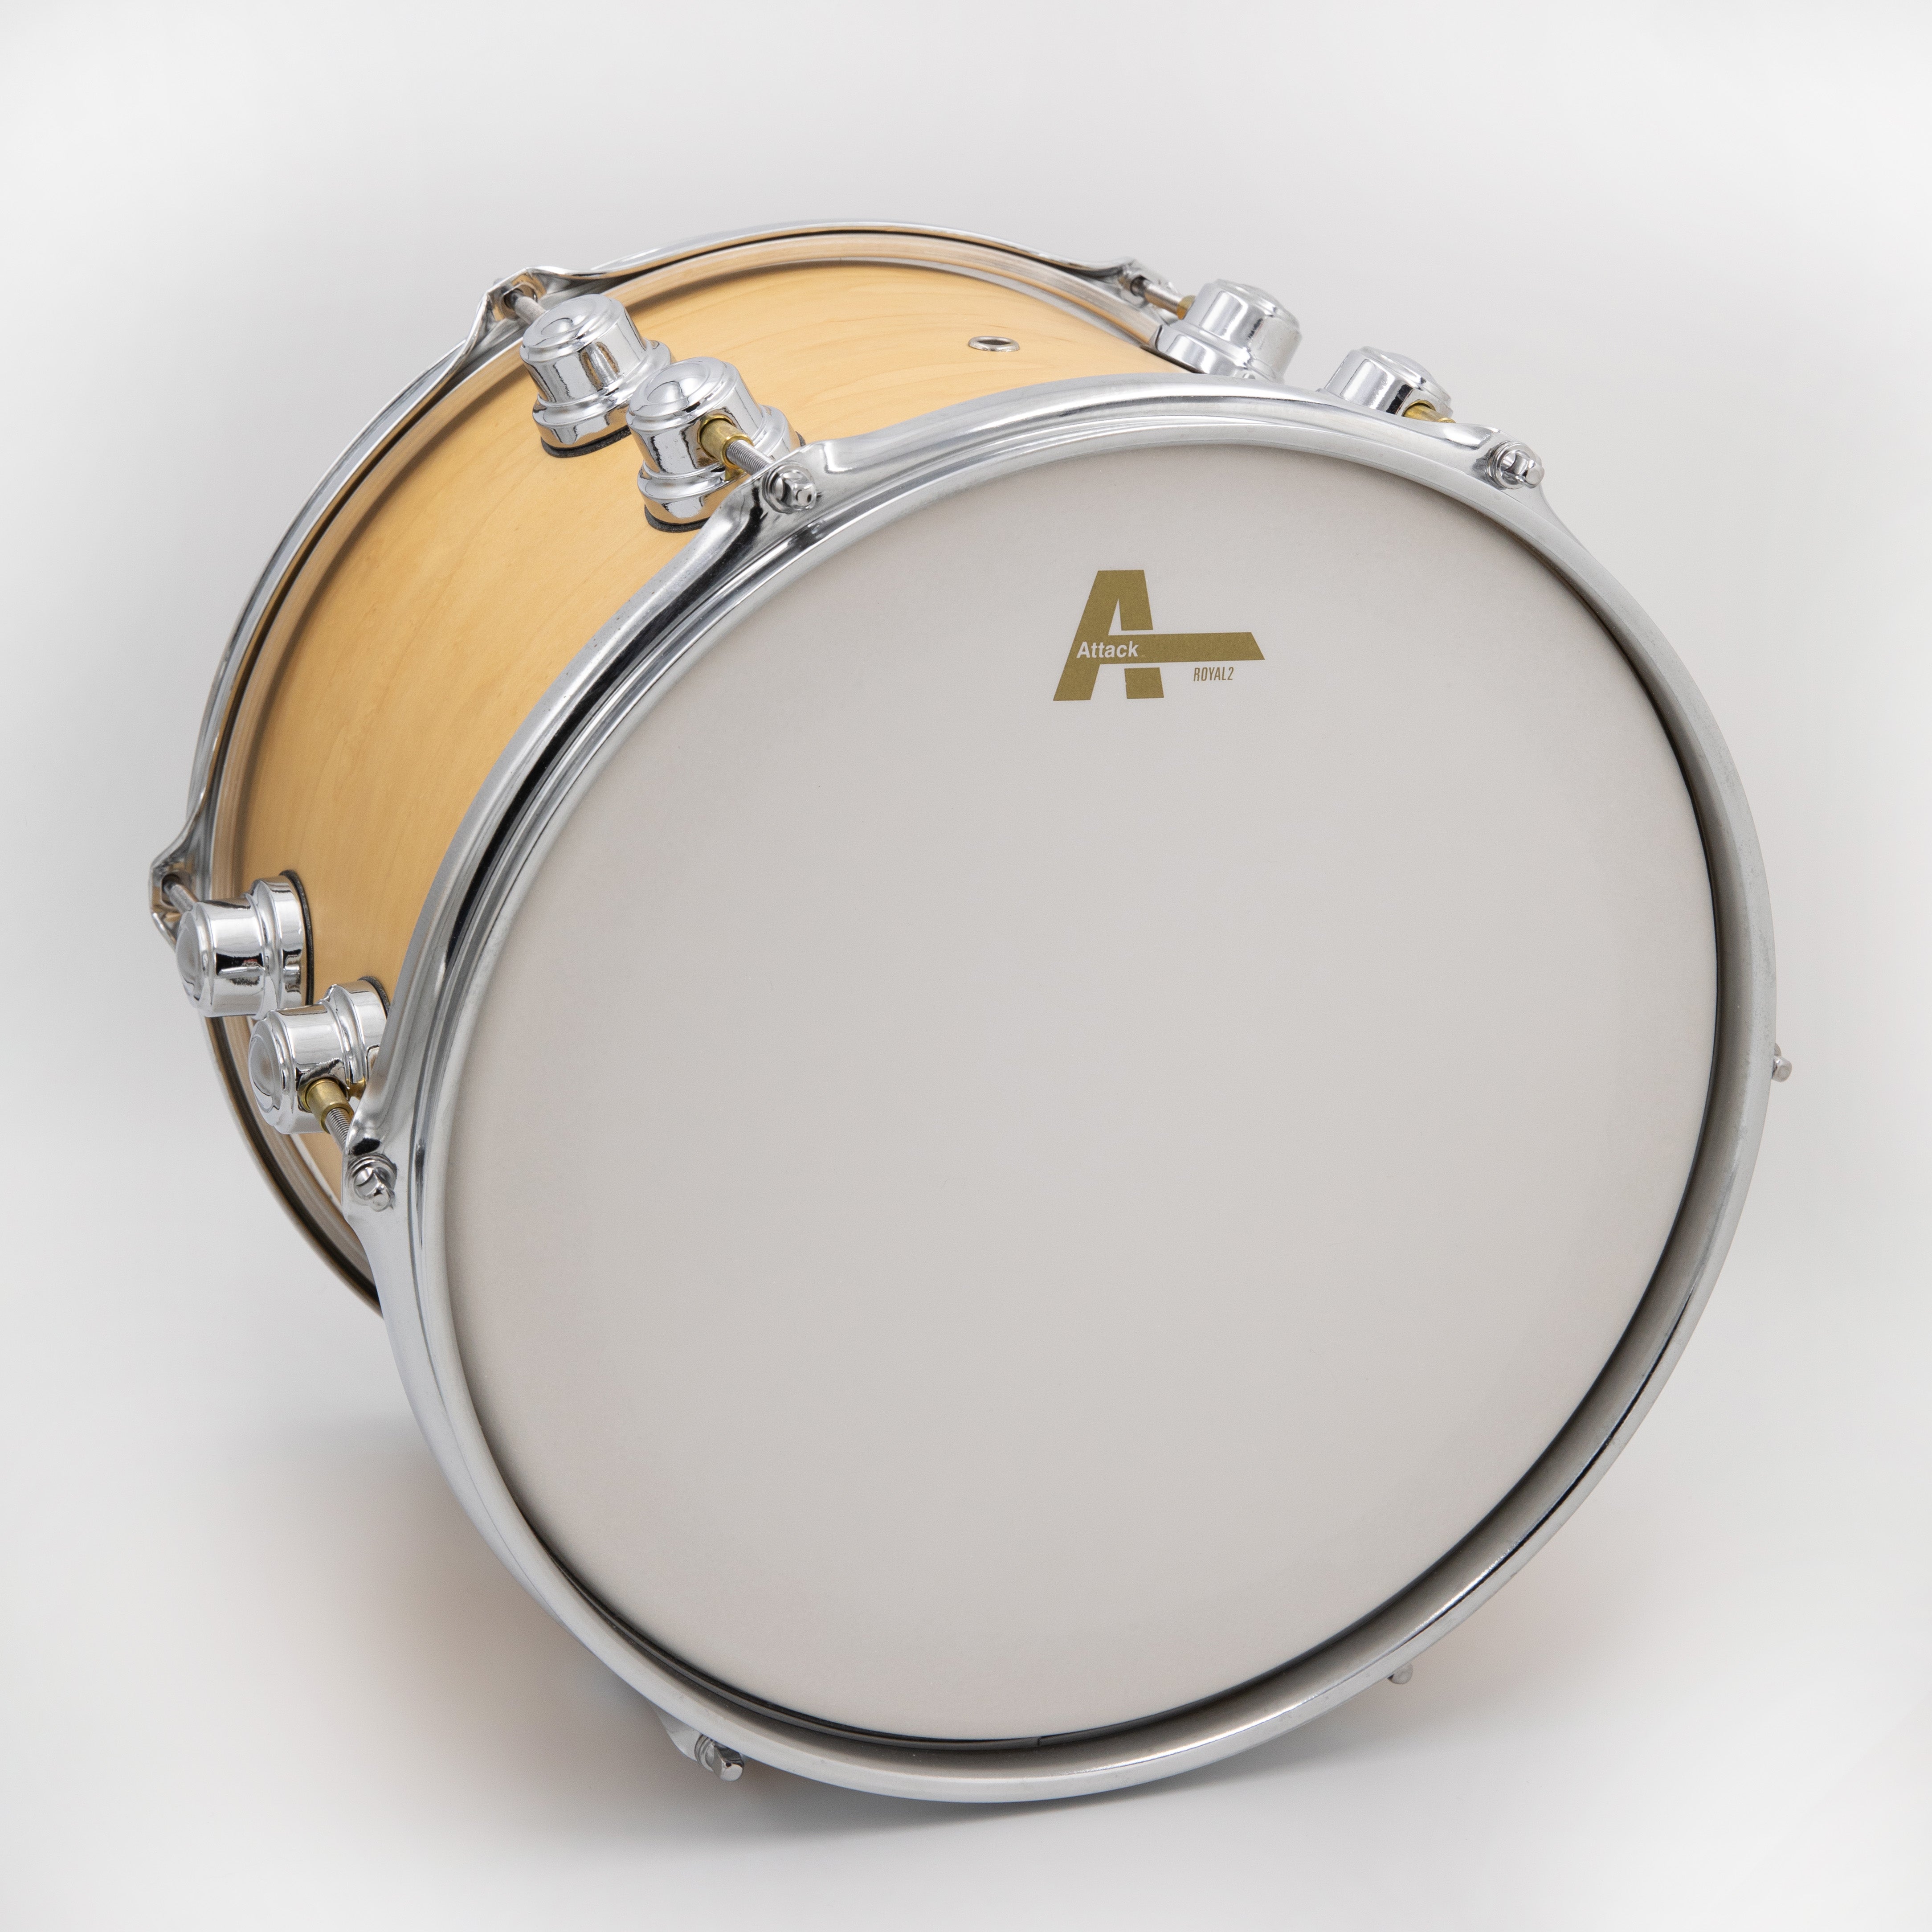 Attack Royal 2 12" 2-Ply Medium Clear S Film Drumhead - Coated